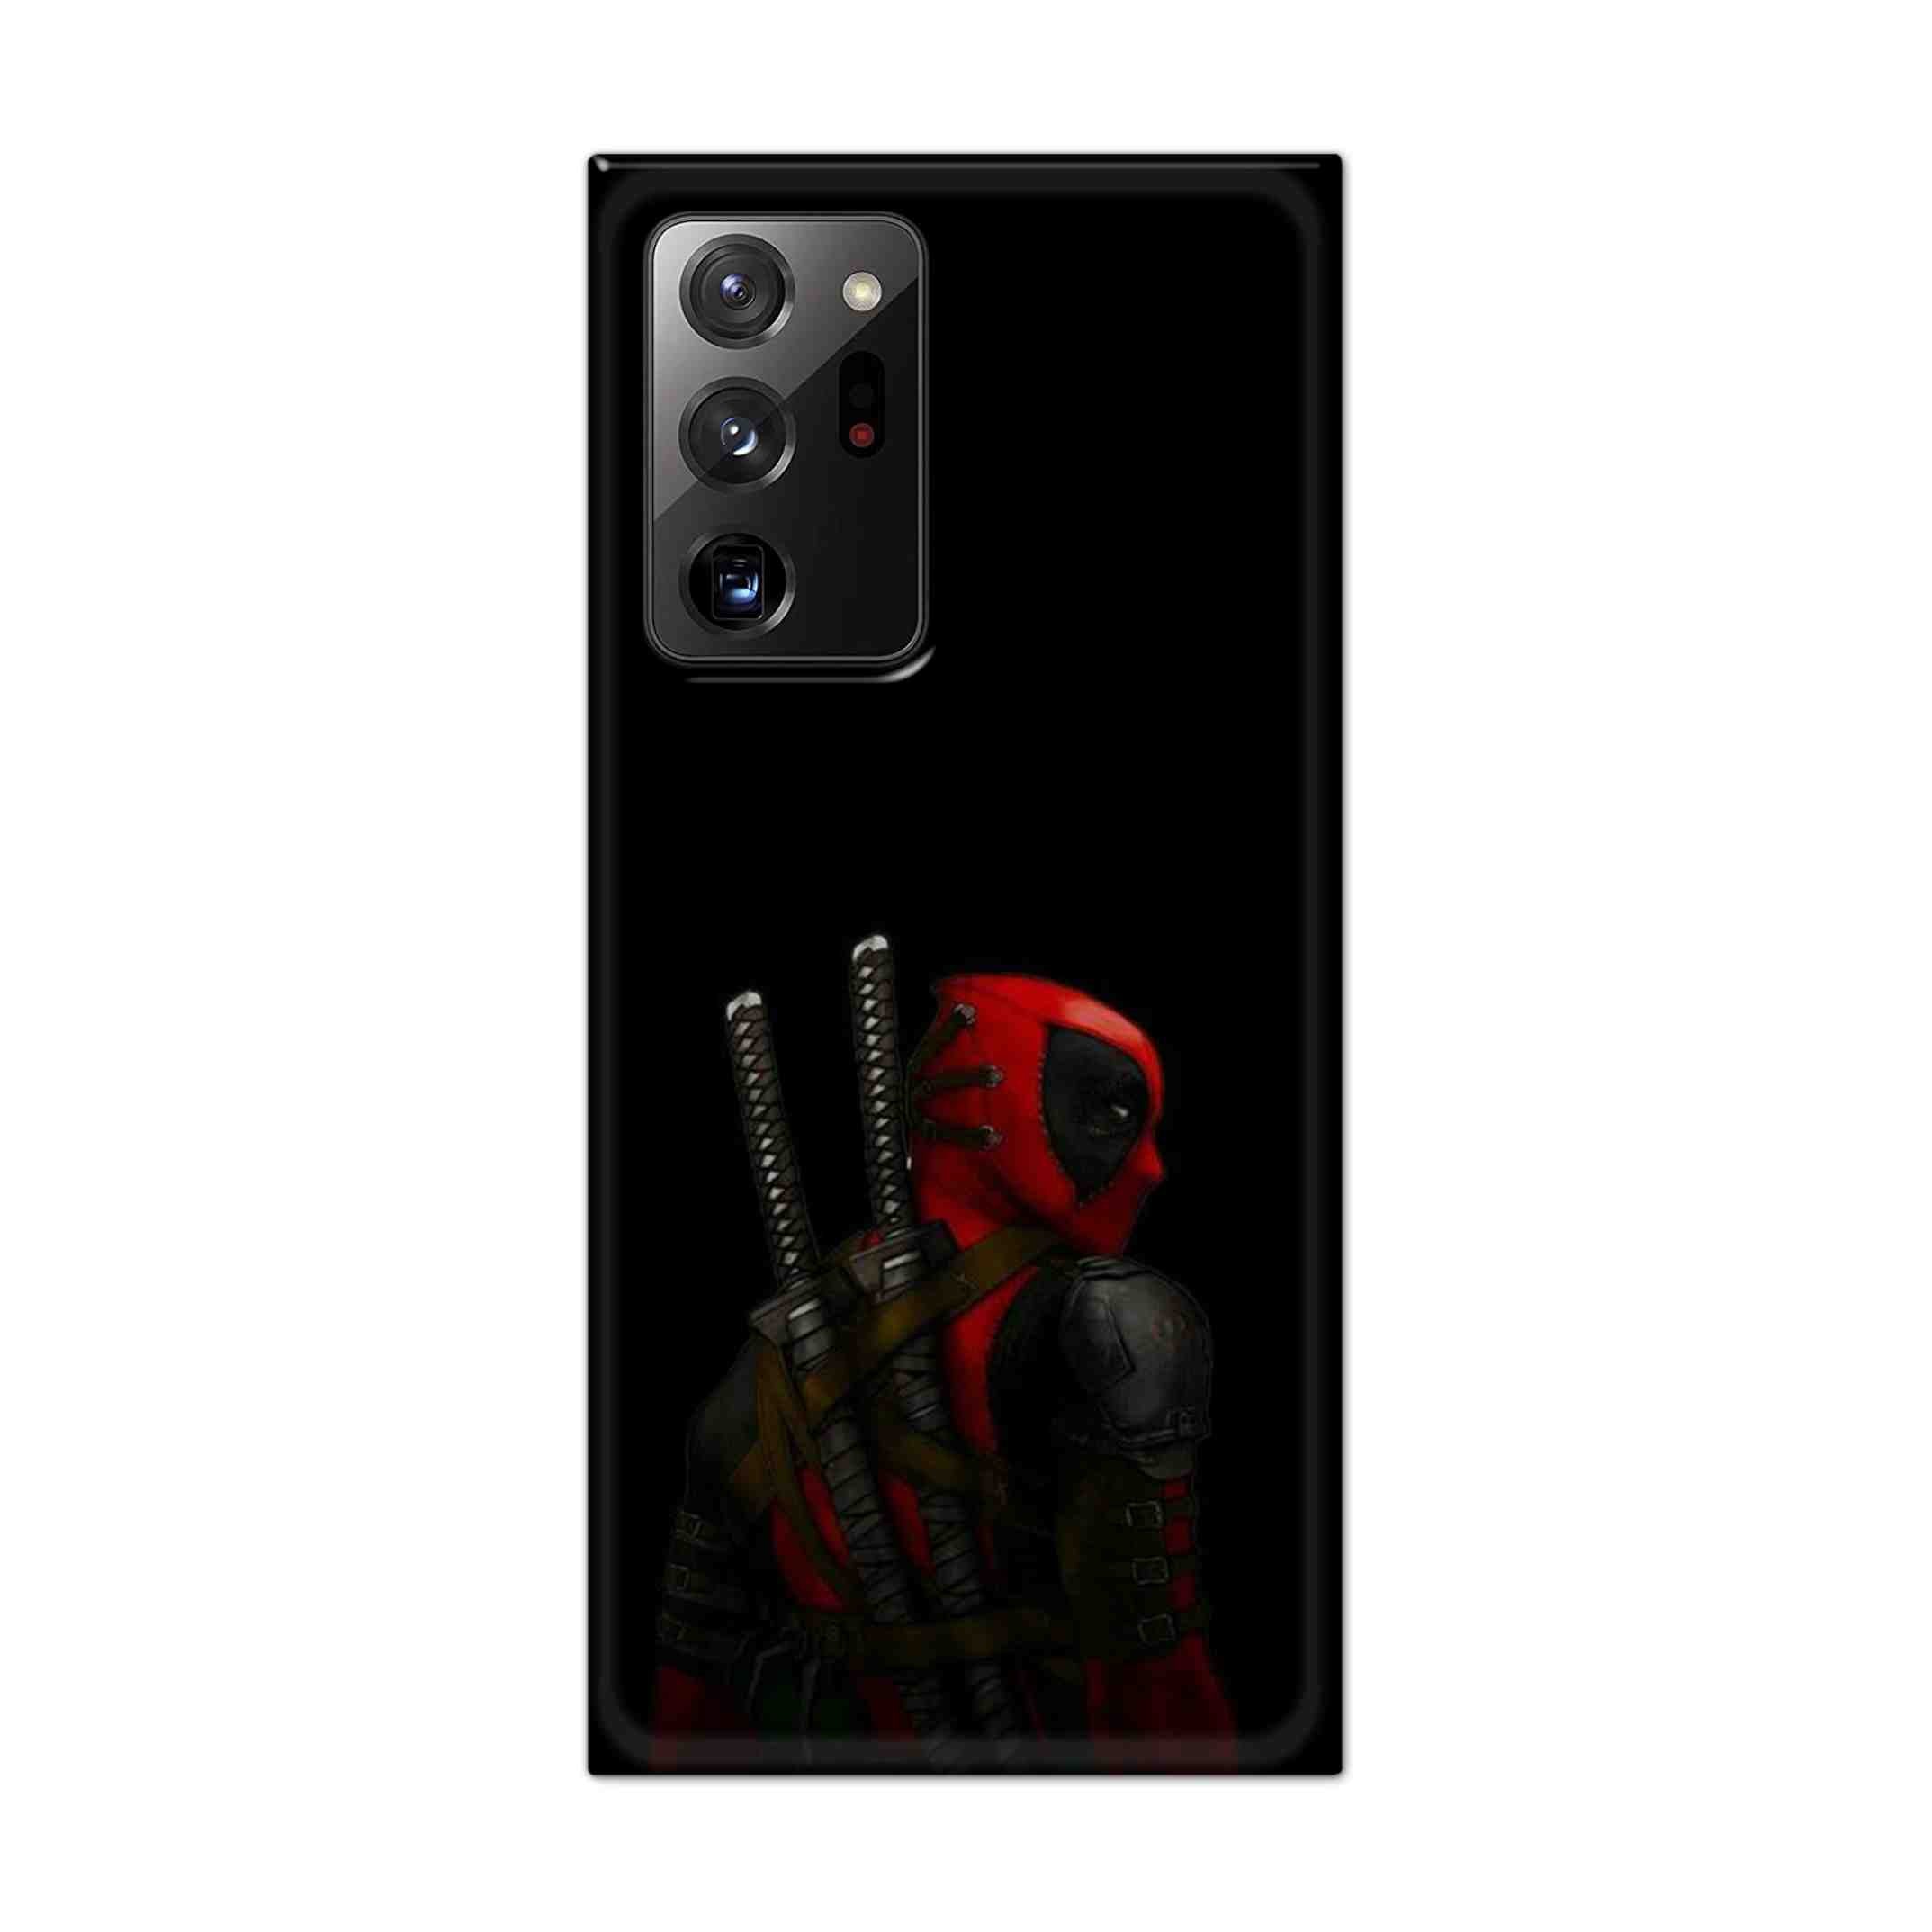 Buy Deadpool Hard Back Mobile Phone Case Cover For Samsung Galaxy Note 20 Ultra Online